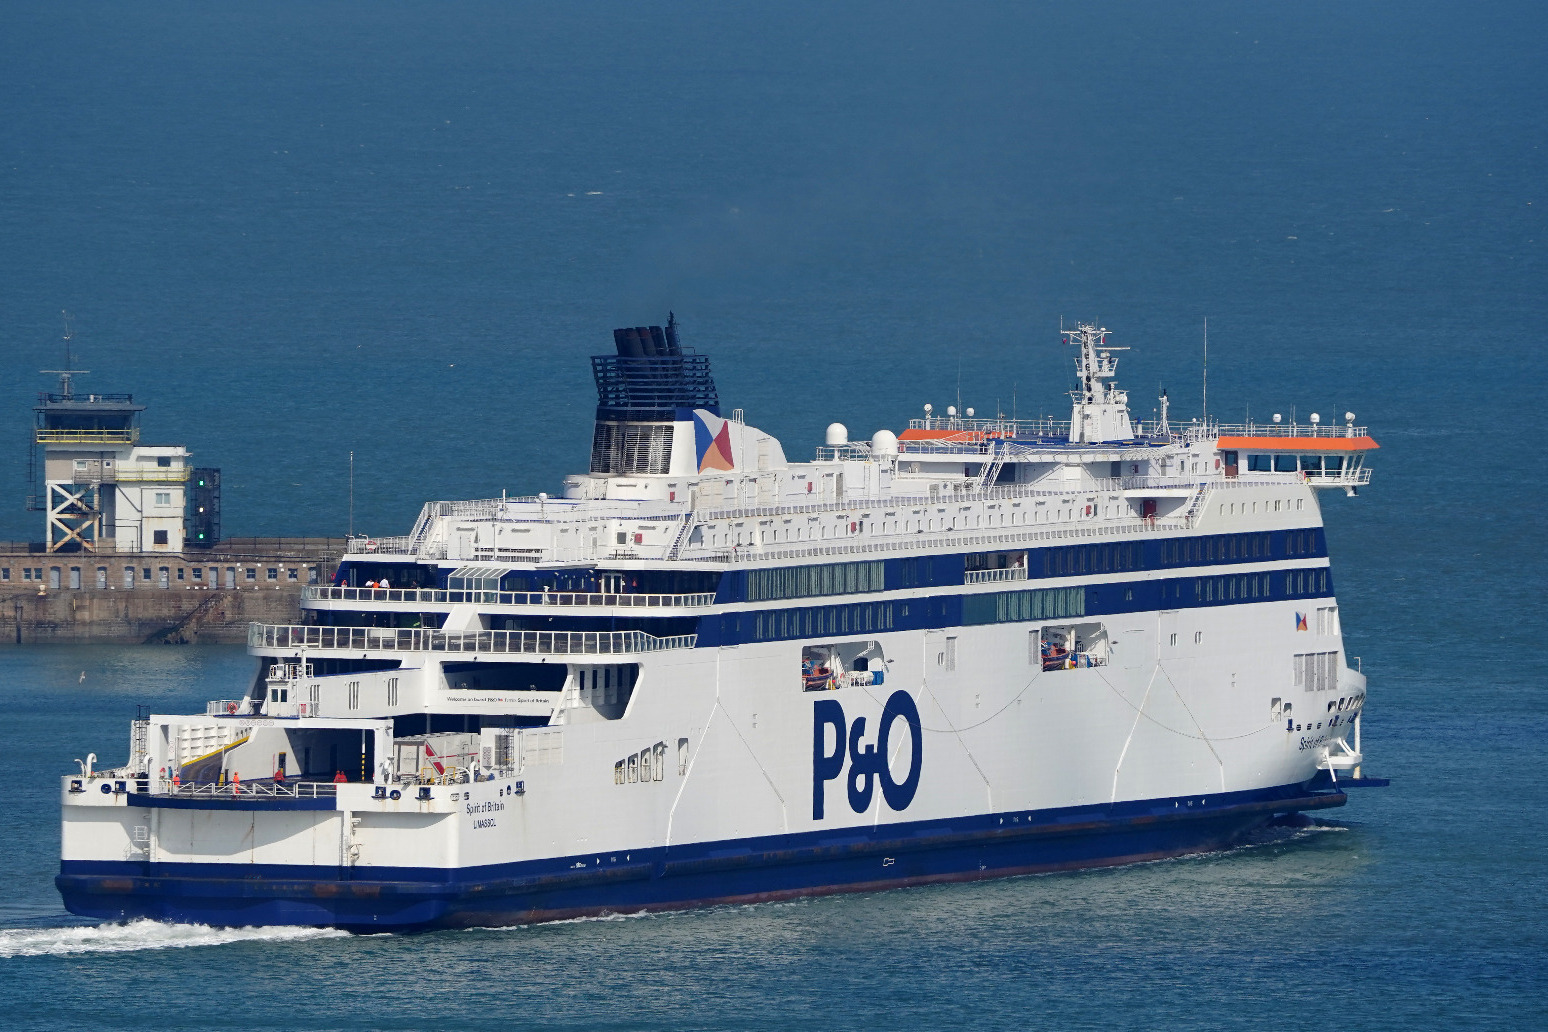 Union outrage as owner of P&O Ferries makes record profit 